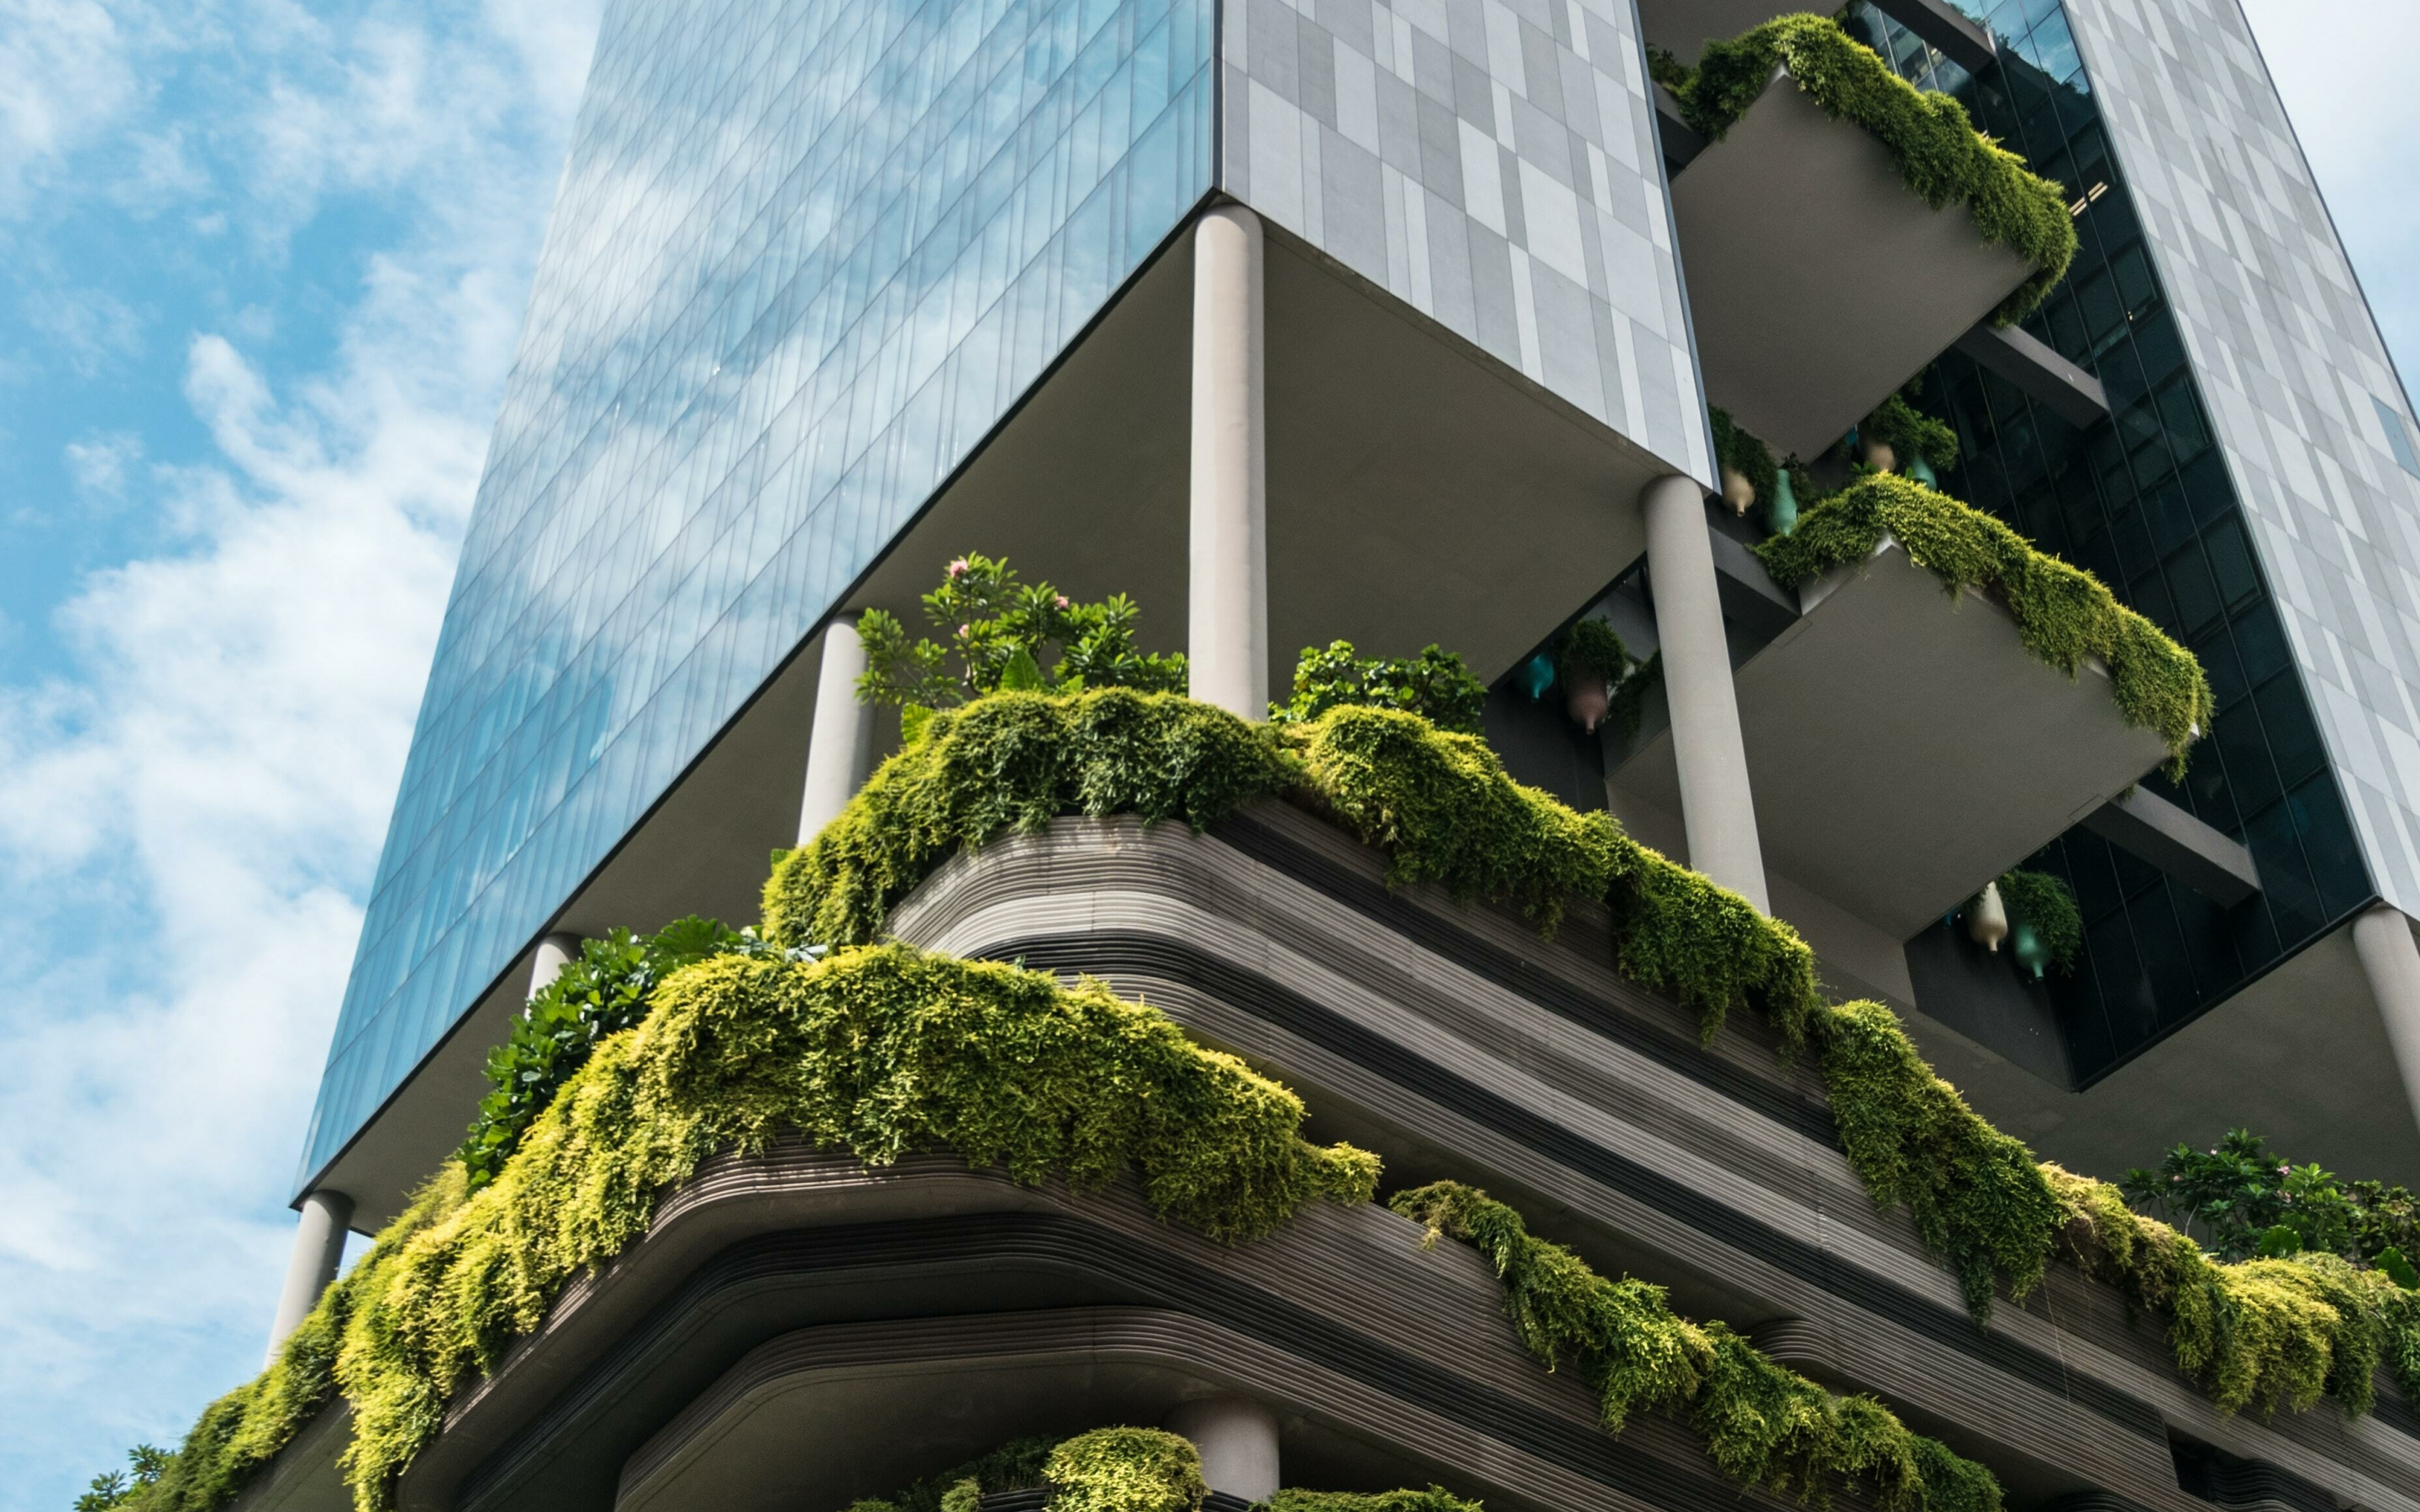 Modern & eco-friendly architecture, buildings with plants, 2880x1800 wallpaper